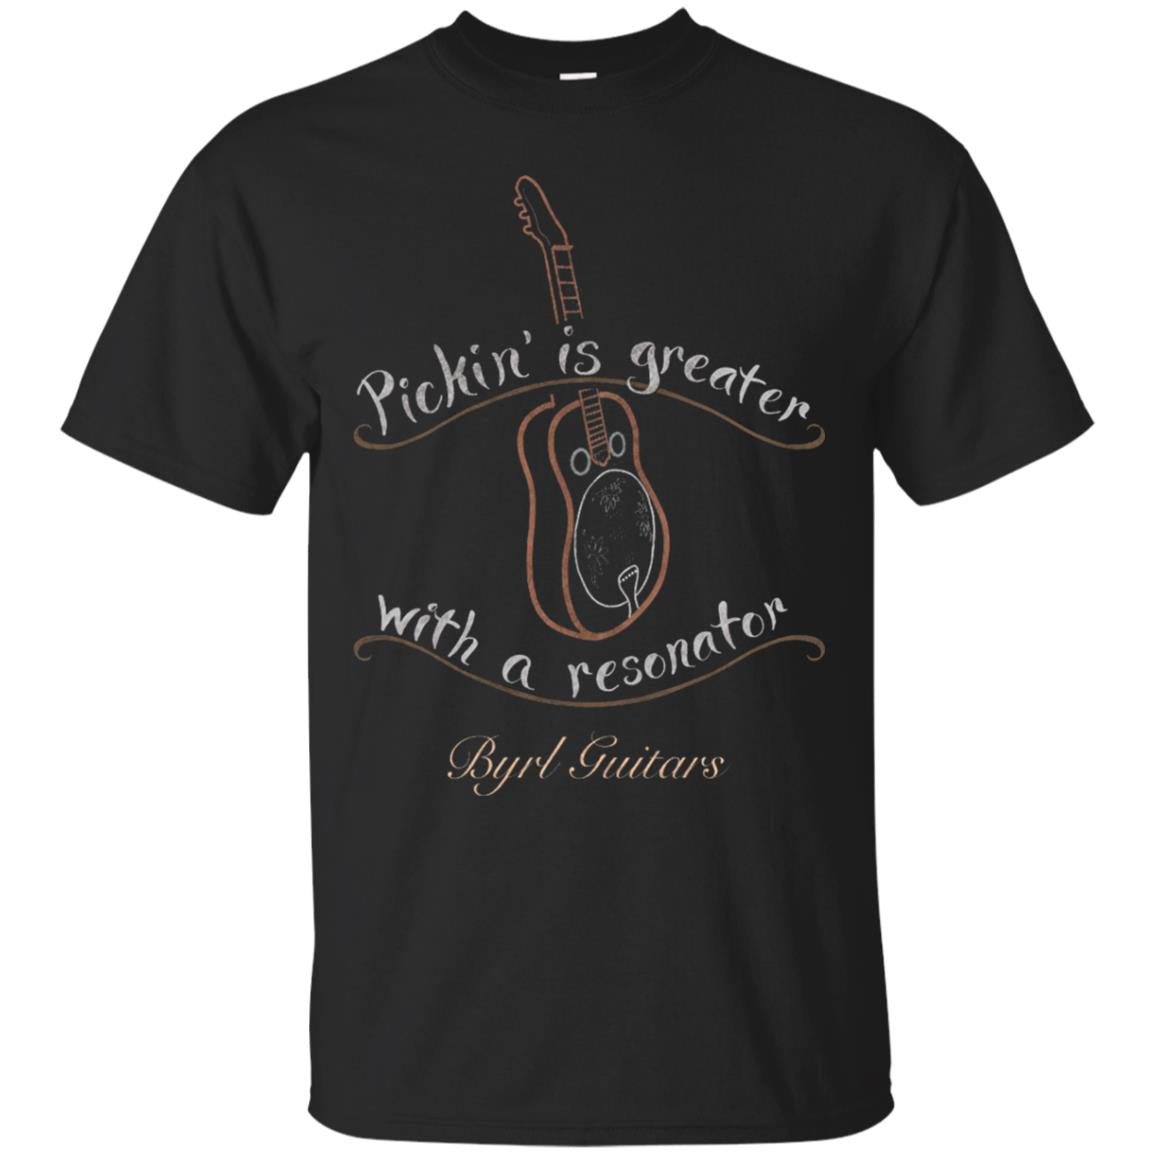 Funny Guitar Shirt Picking Is Greater With A Reasonator